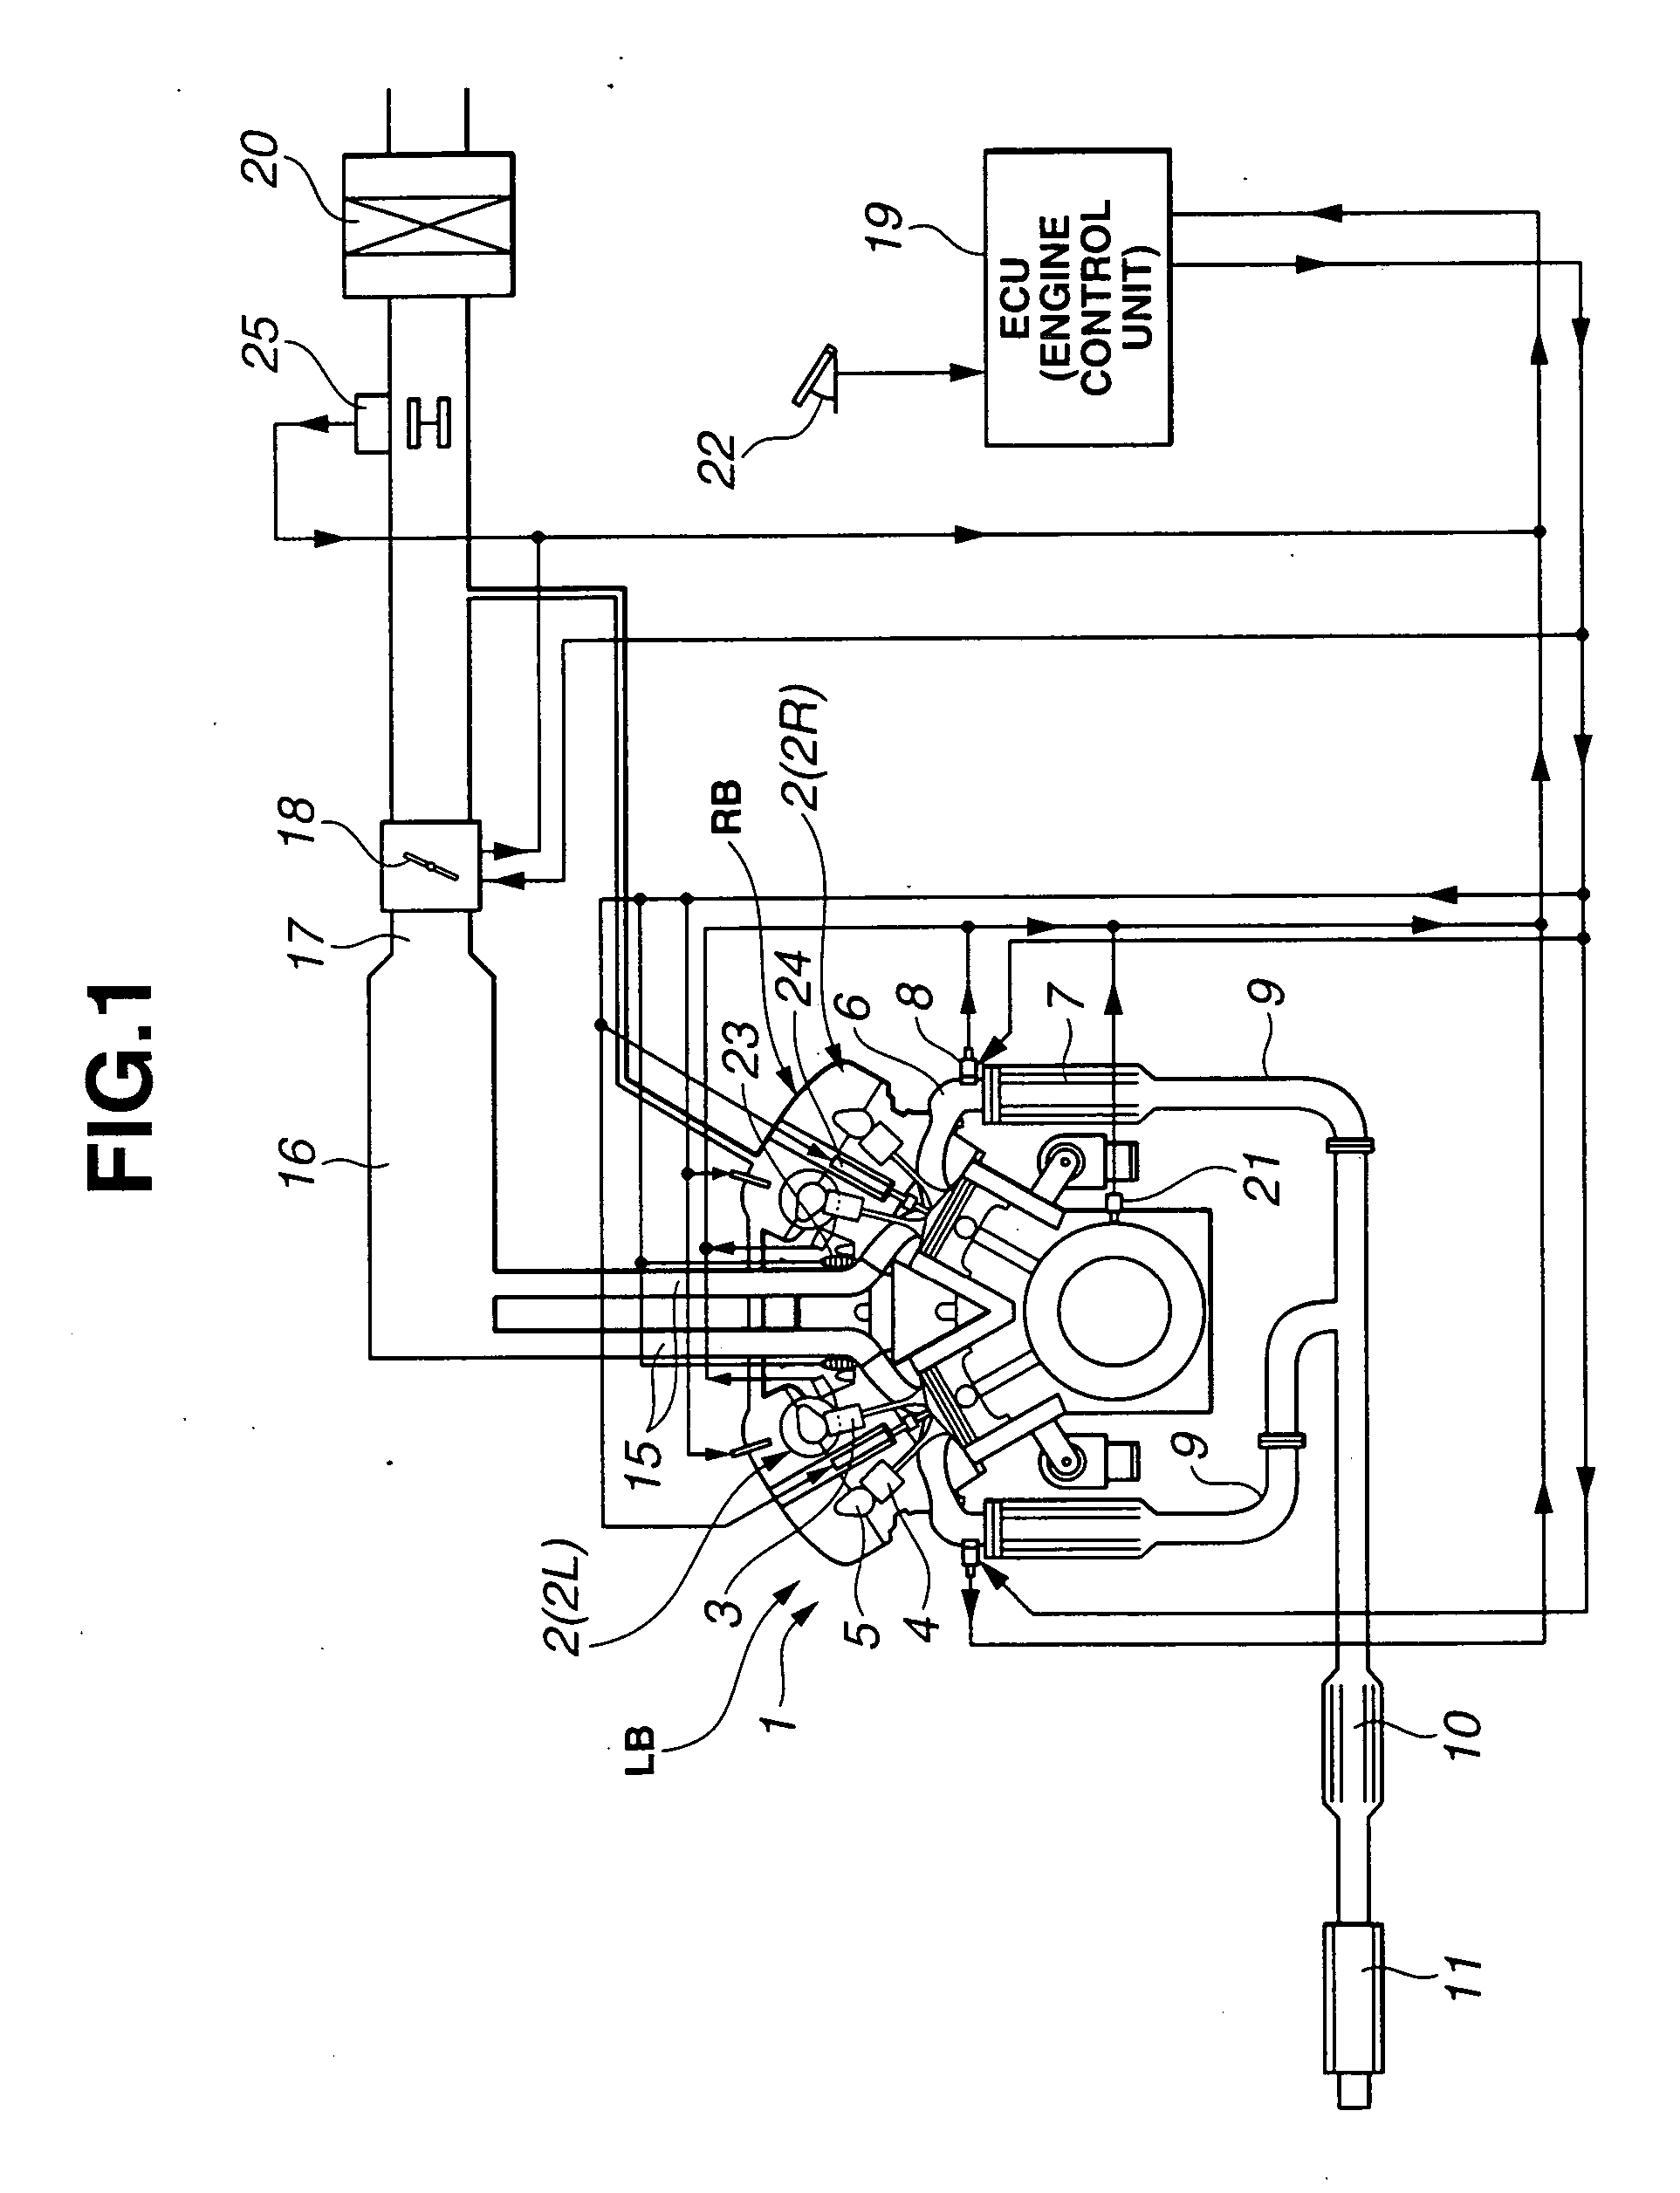 Variable valve control system and method for multi-cylinder internal combustion engine